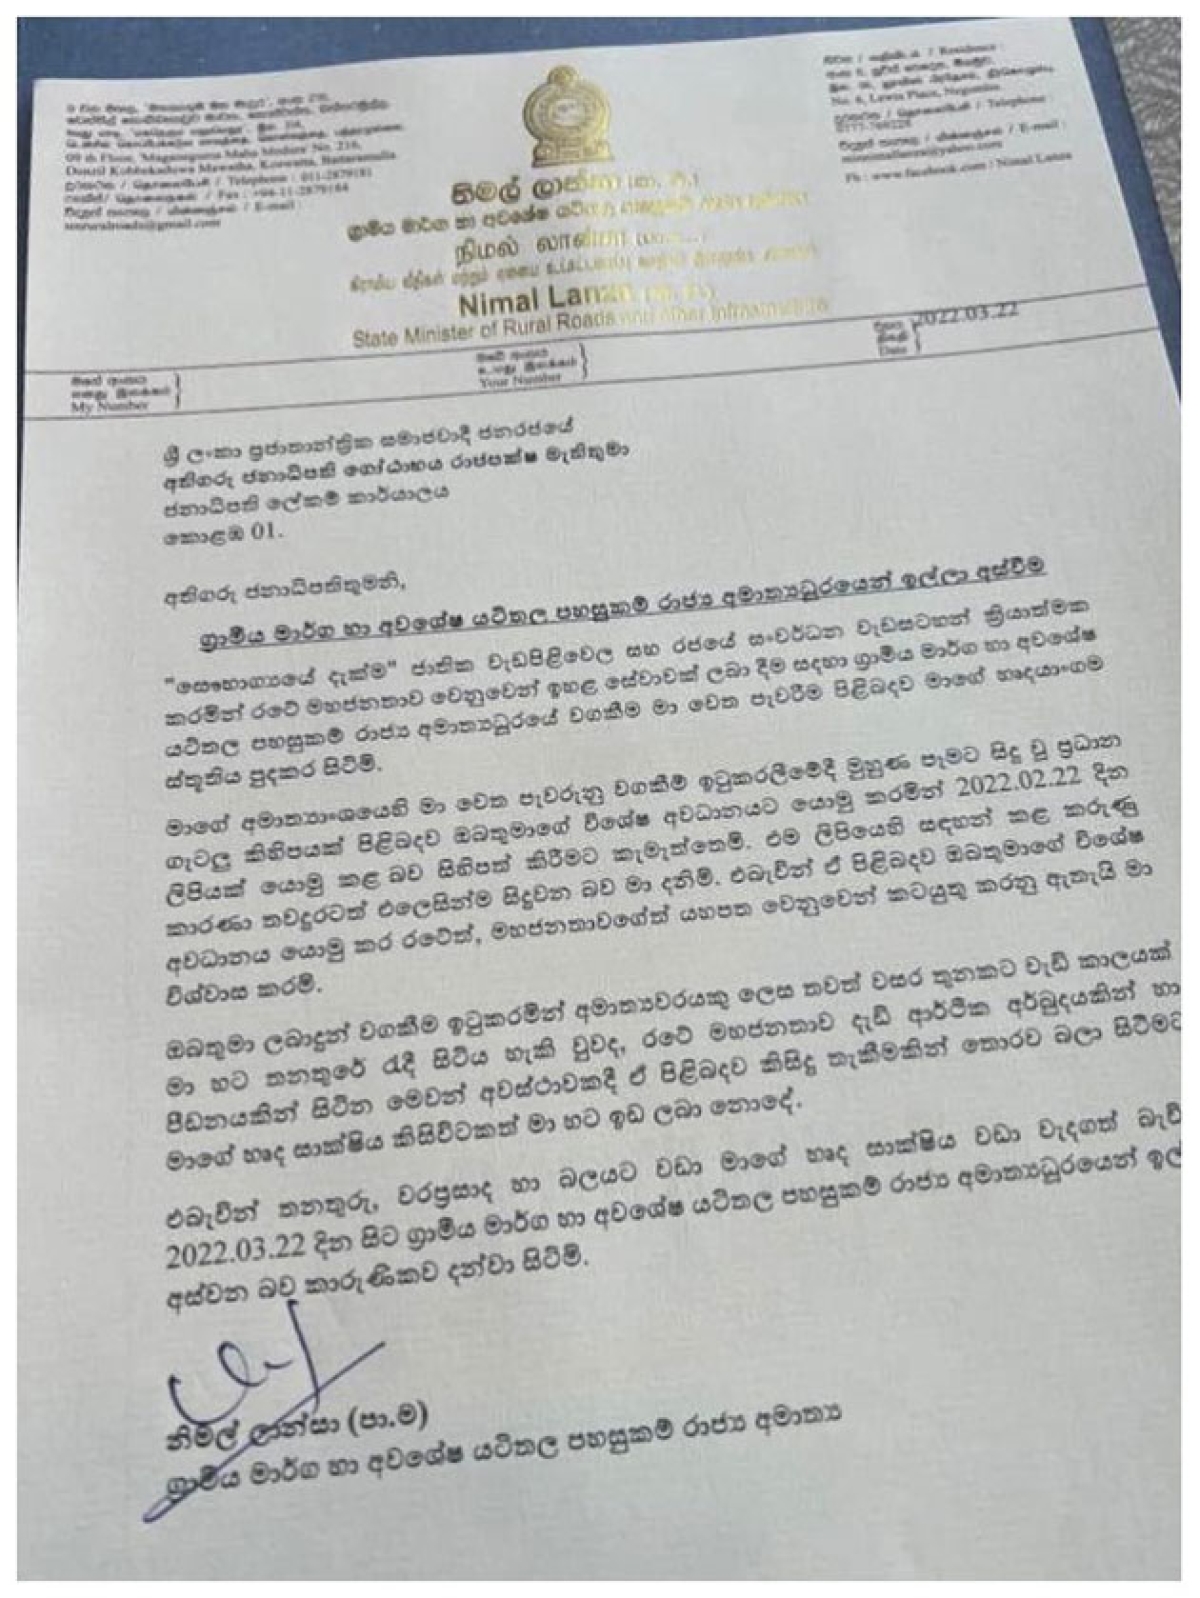 SEE LETTER: Nimal Lansa Resigns From State Minister Portfolio Citing &quot;Severe Economic Hardships&quot; Faced By People